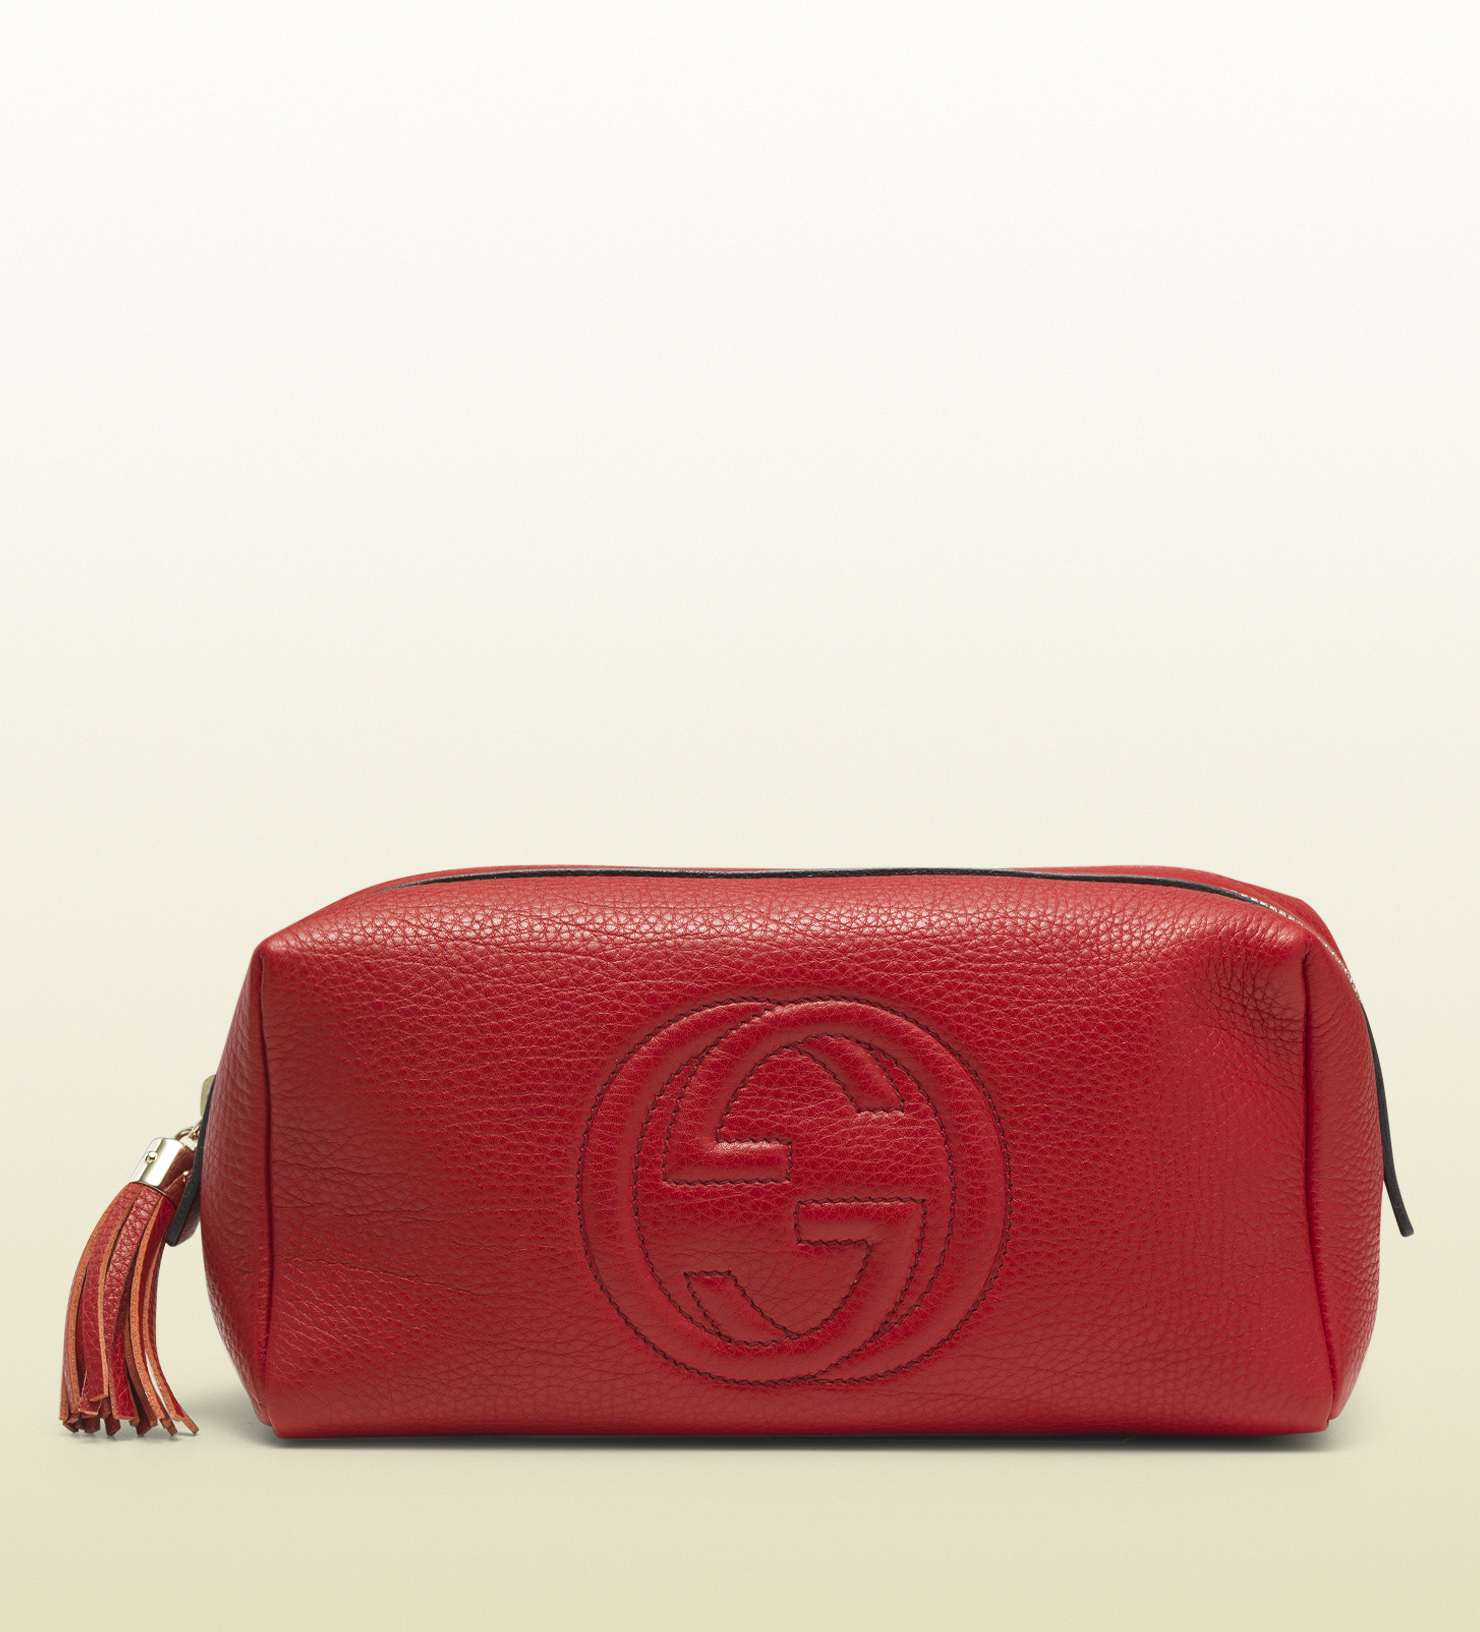 Gucci Soho Large Red Leather Cosmetic Bag in Red - Lyst